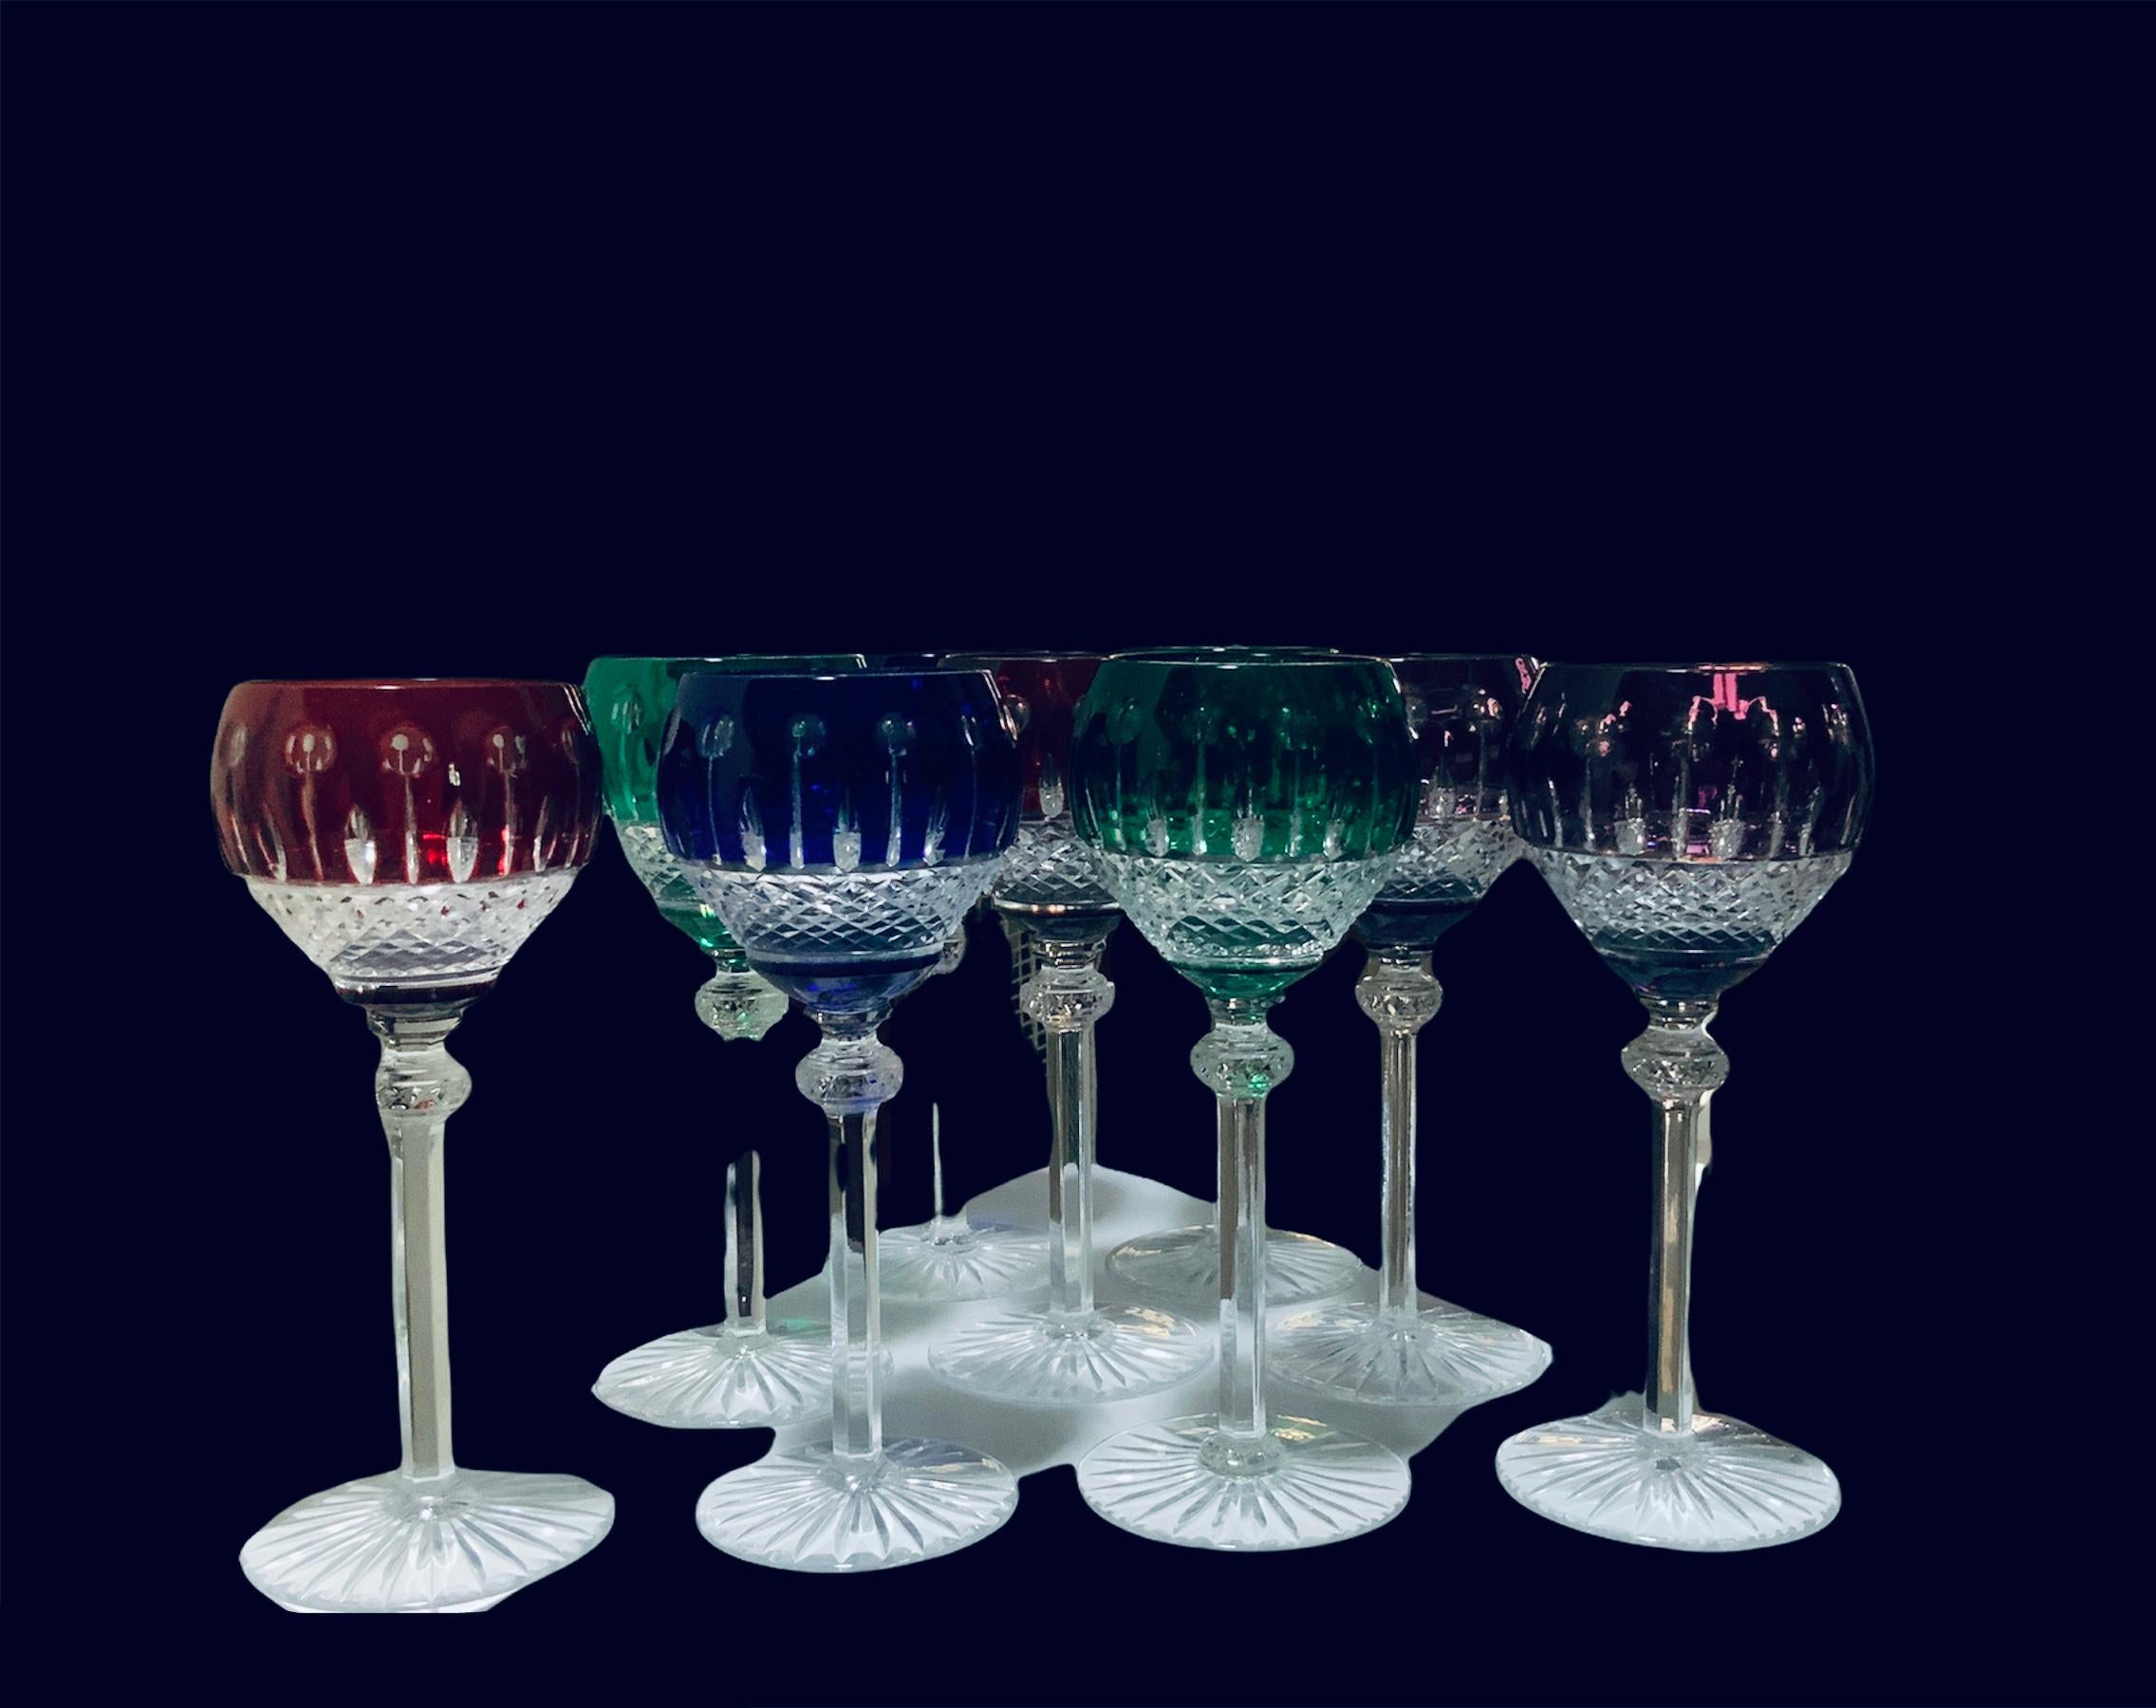 This is a set of nine Godinger King Louis pattern clear to color cut crystal hock wine round glasses. Their colored bowl is adorned with “feathers” alternated with “lollipops”. Below it, there is a cut clear crystal strawberry diamonds pattern.